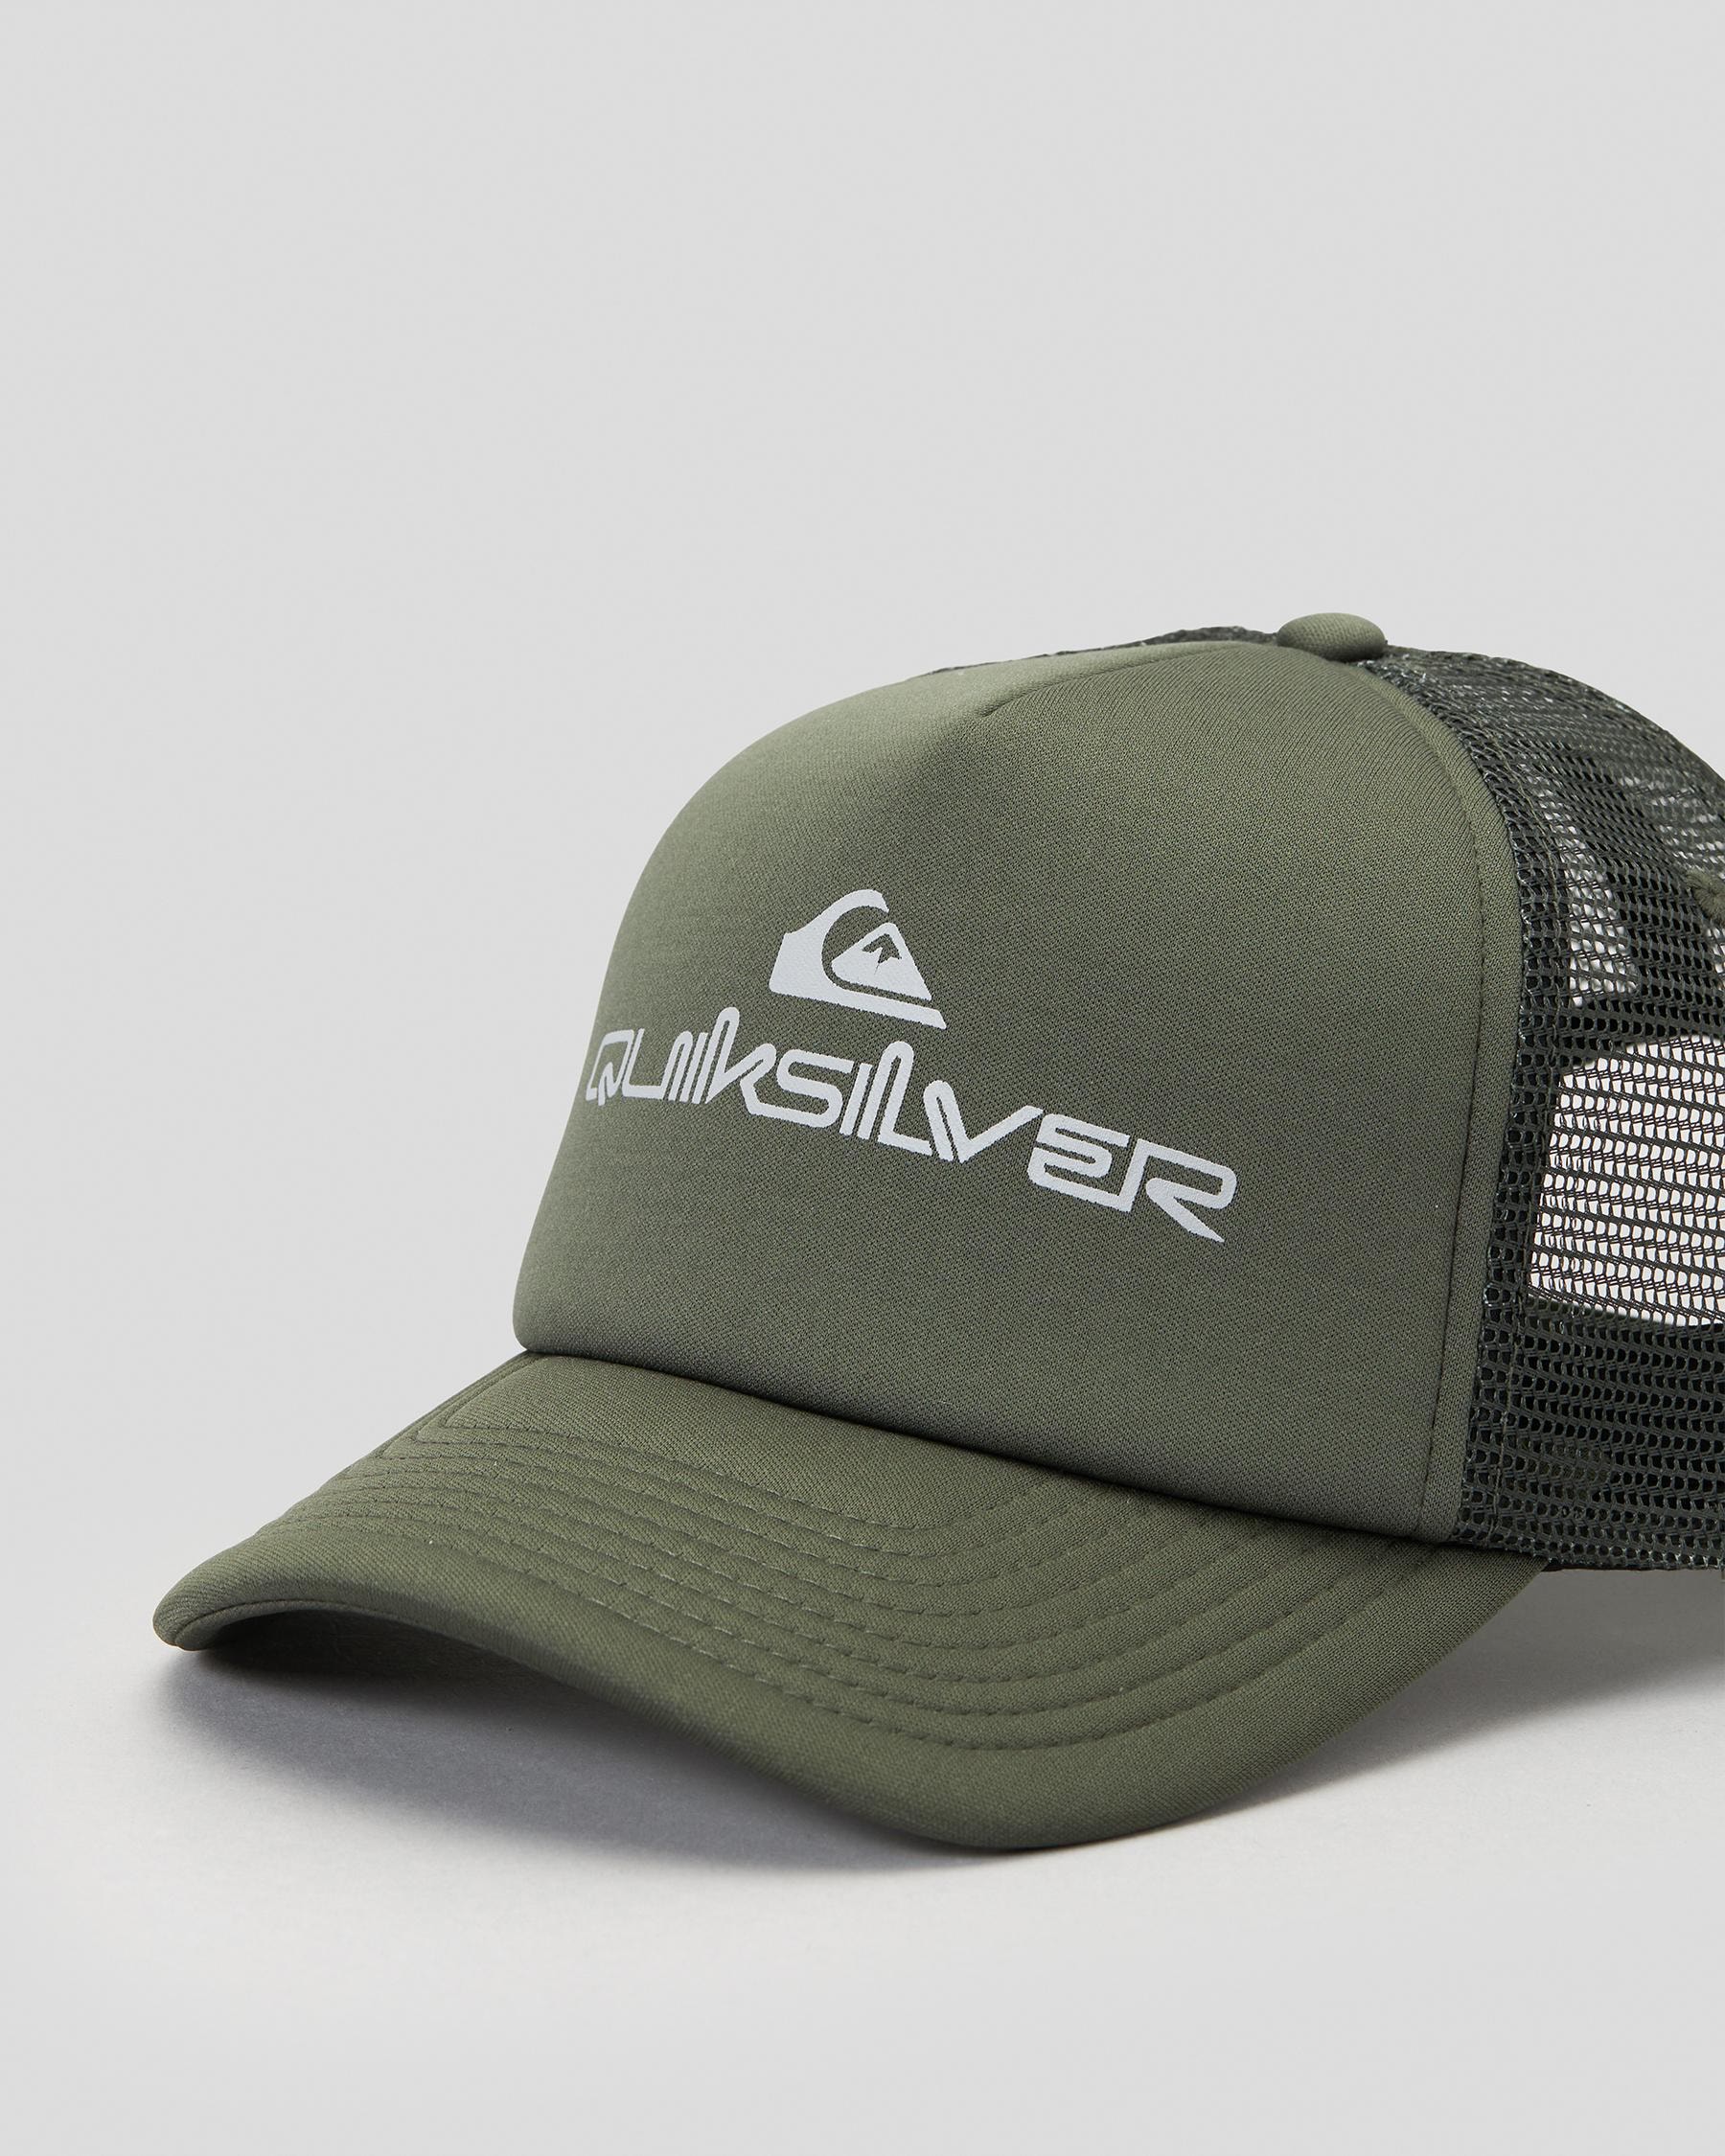 Shipping & Quiksilver Easy FREE* - In Beach United Returns - Thyme Omnistack Trucker States Cap City